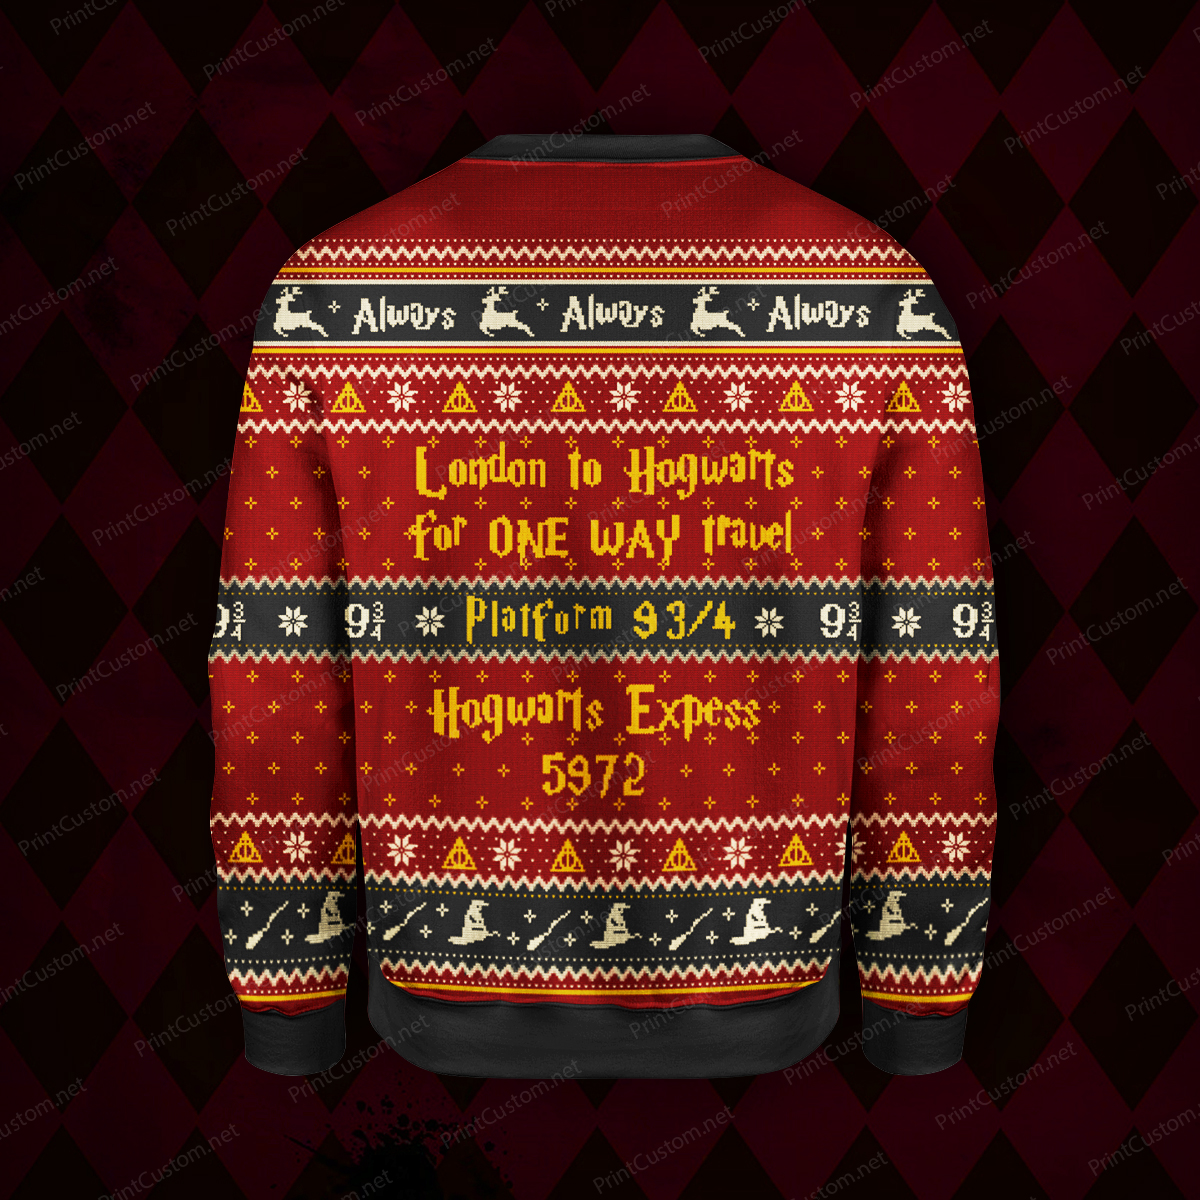 King's cross station harry potter full printing ugly christmas sweater 4